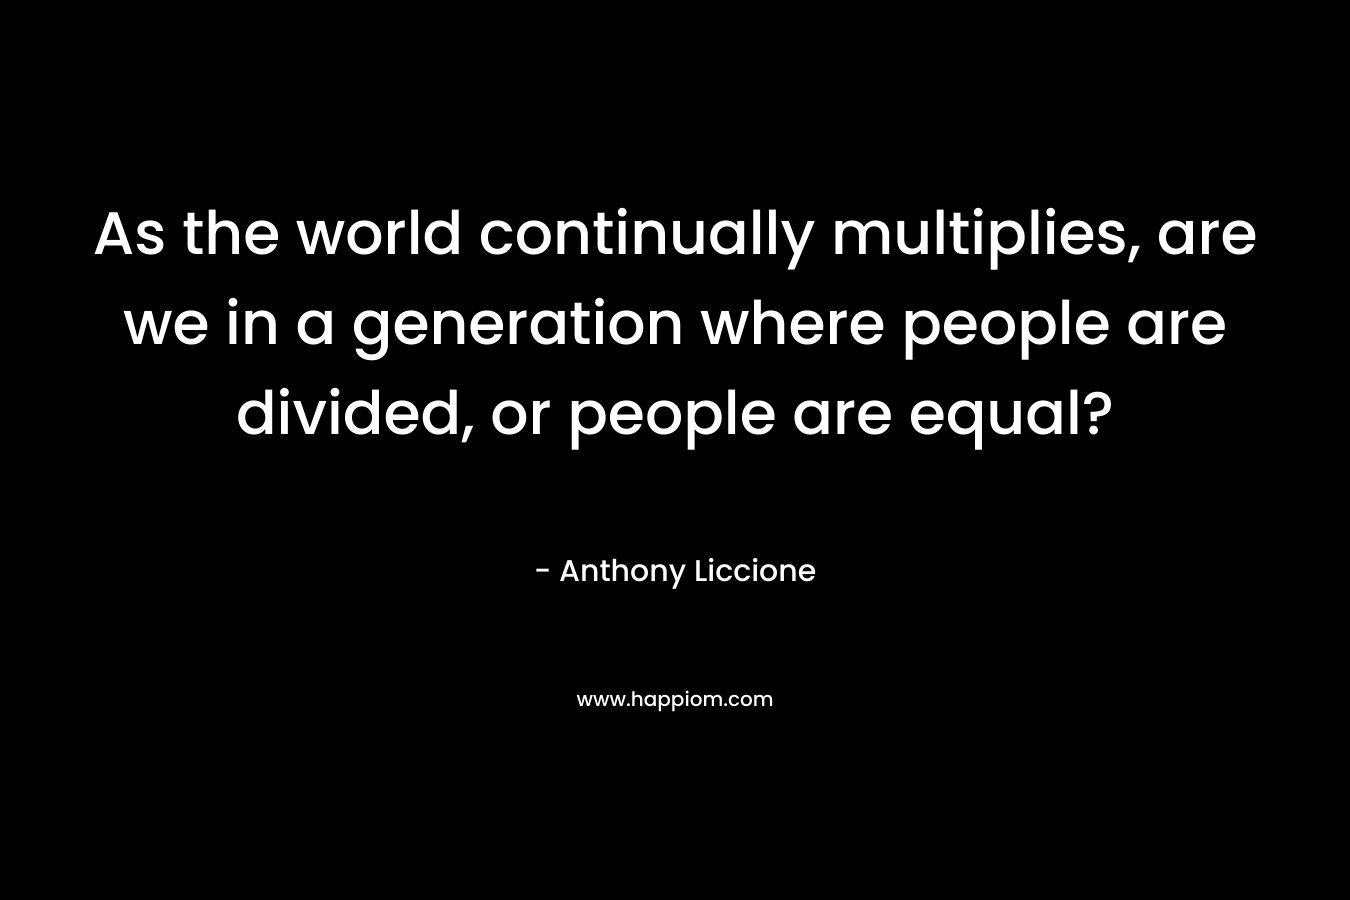 As the world continually multiplies, are we in a generation where people are divided, or people are equal?